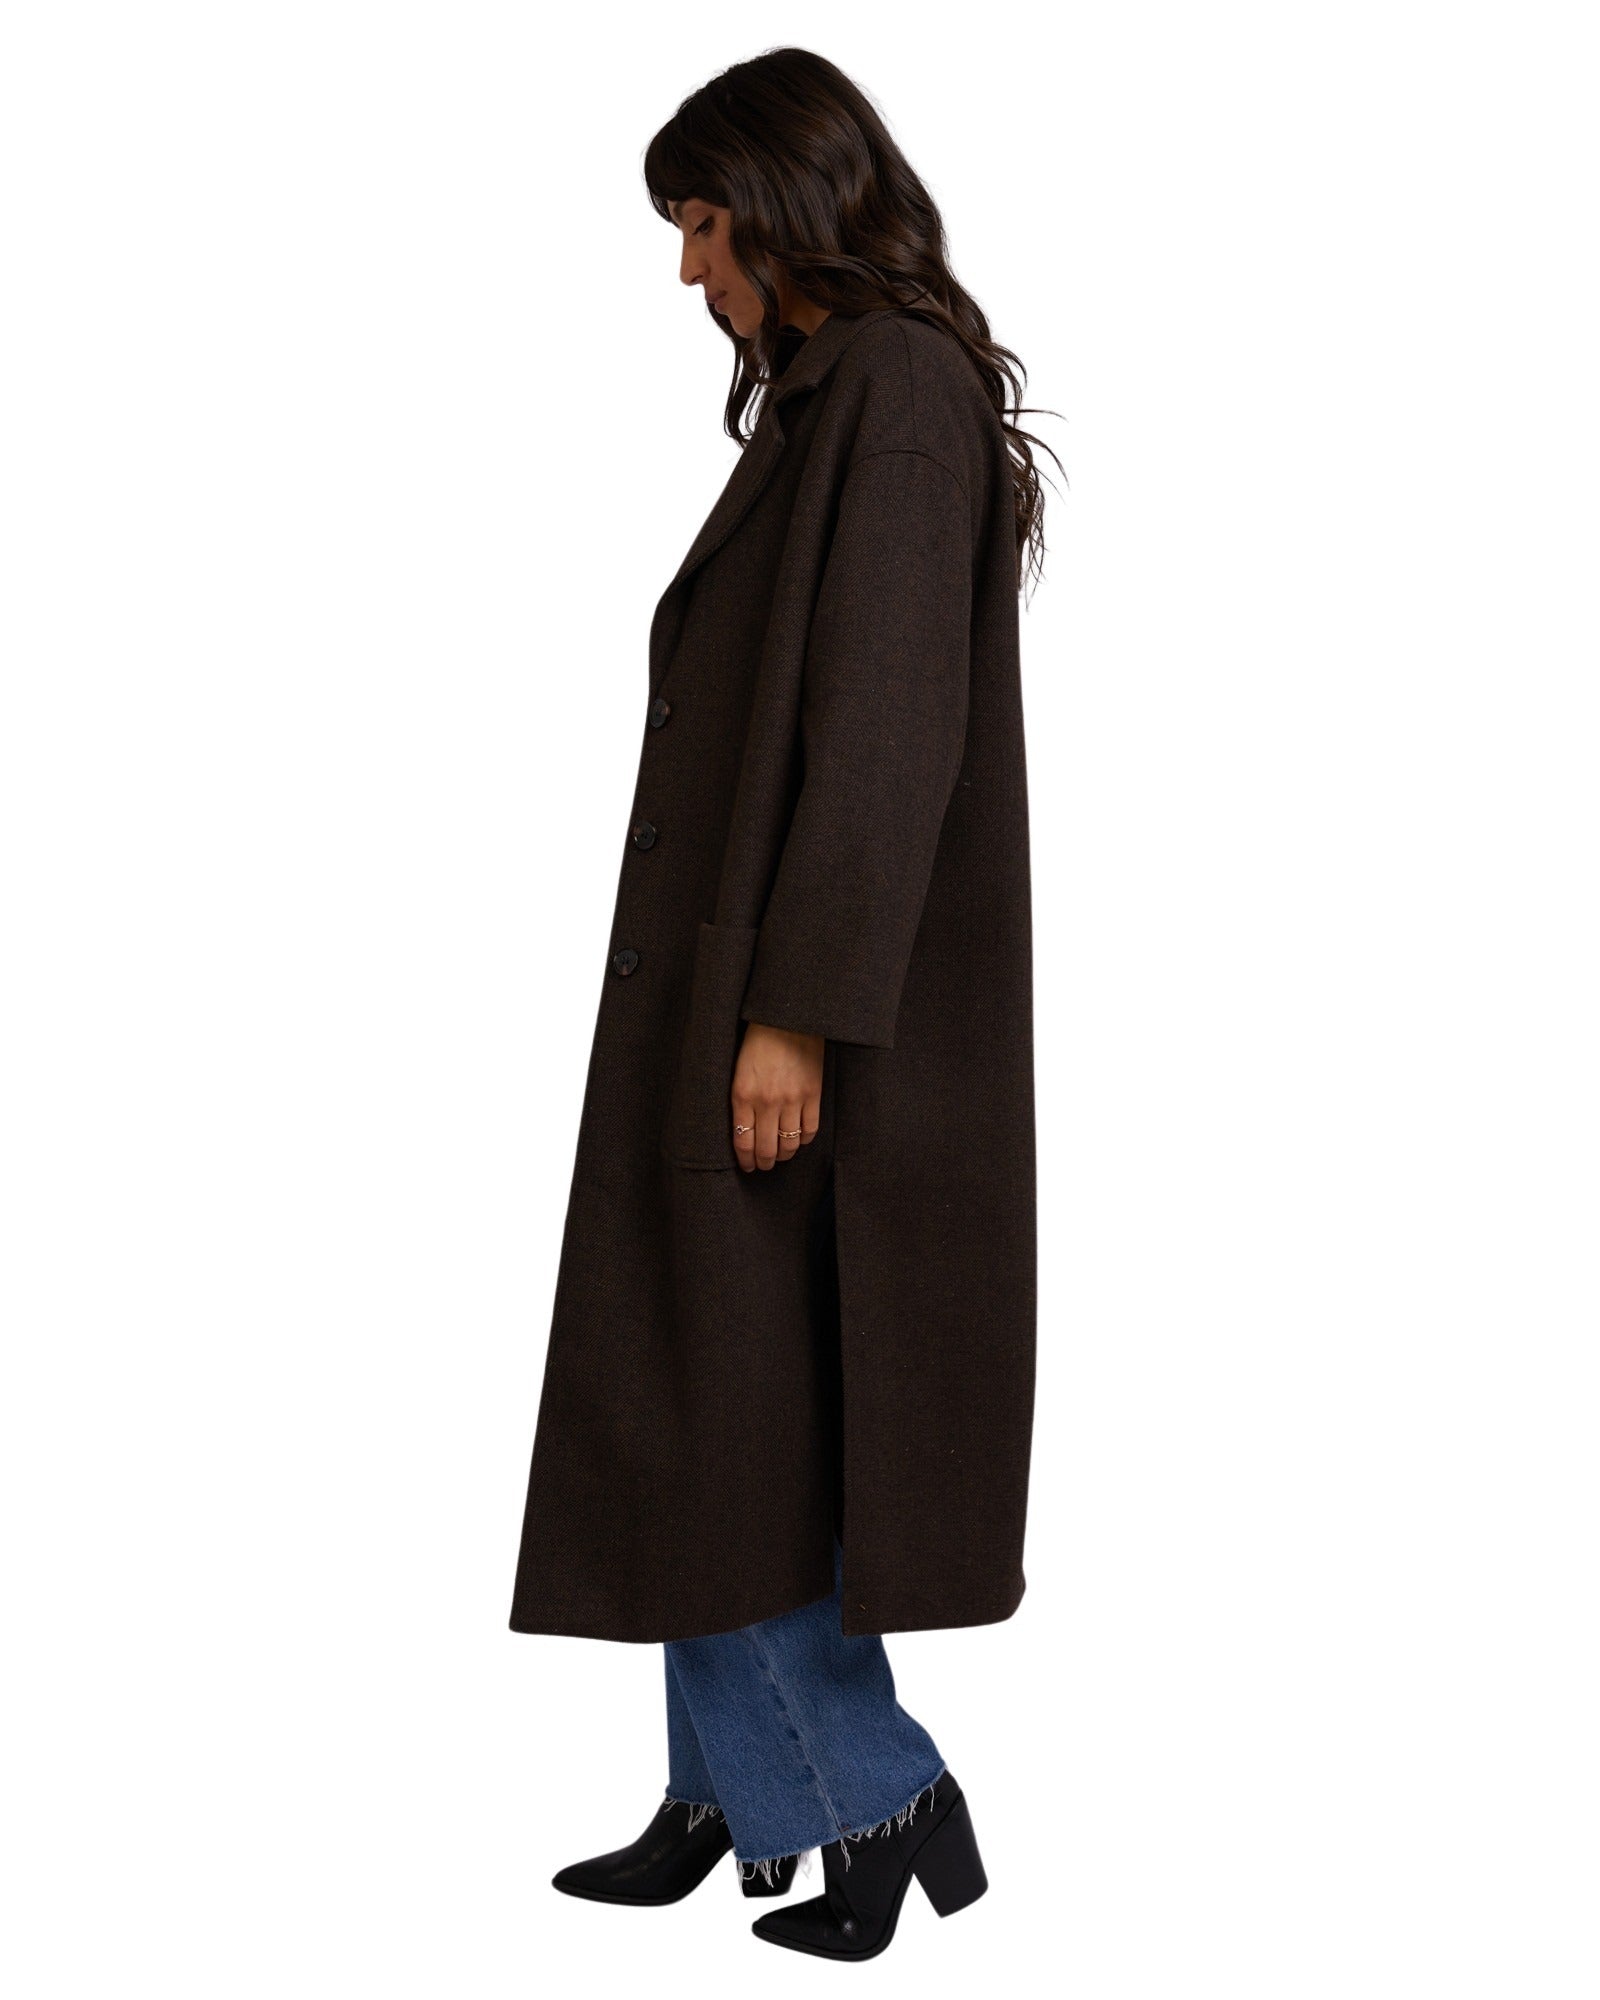 All About Eve - Manhattan Coat - Brown